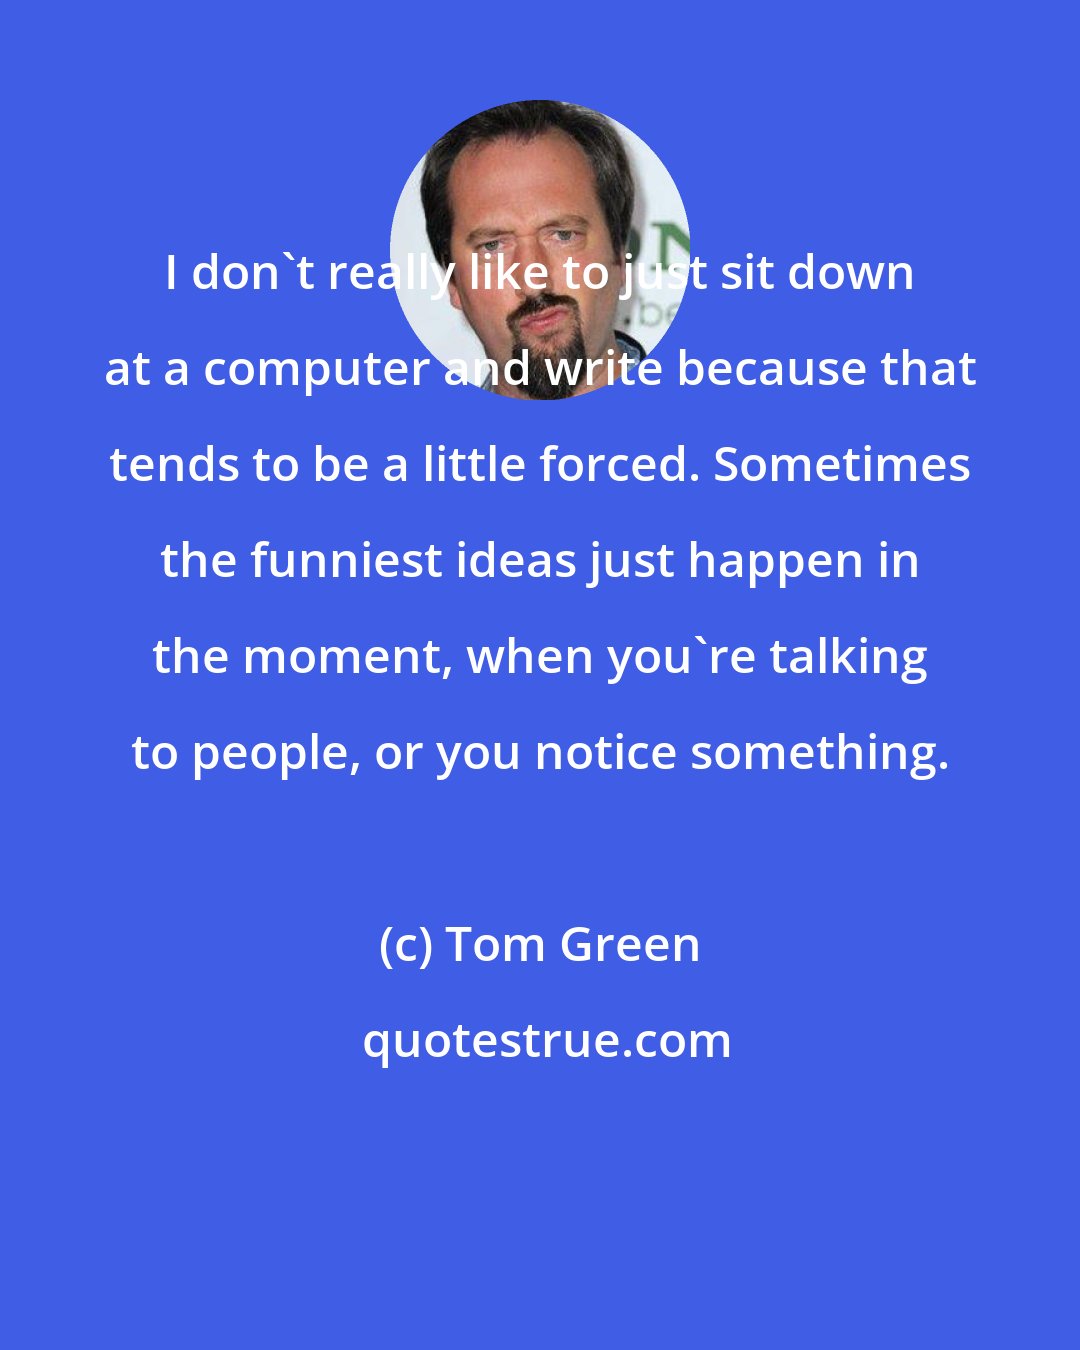 Tom Green: I don't really like to just sit down at a computer and write because that tends to be a little forced. Sometimes the funniest ideas just happen in the moment, when you're talking to people, or you notice something.